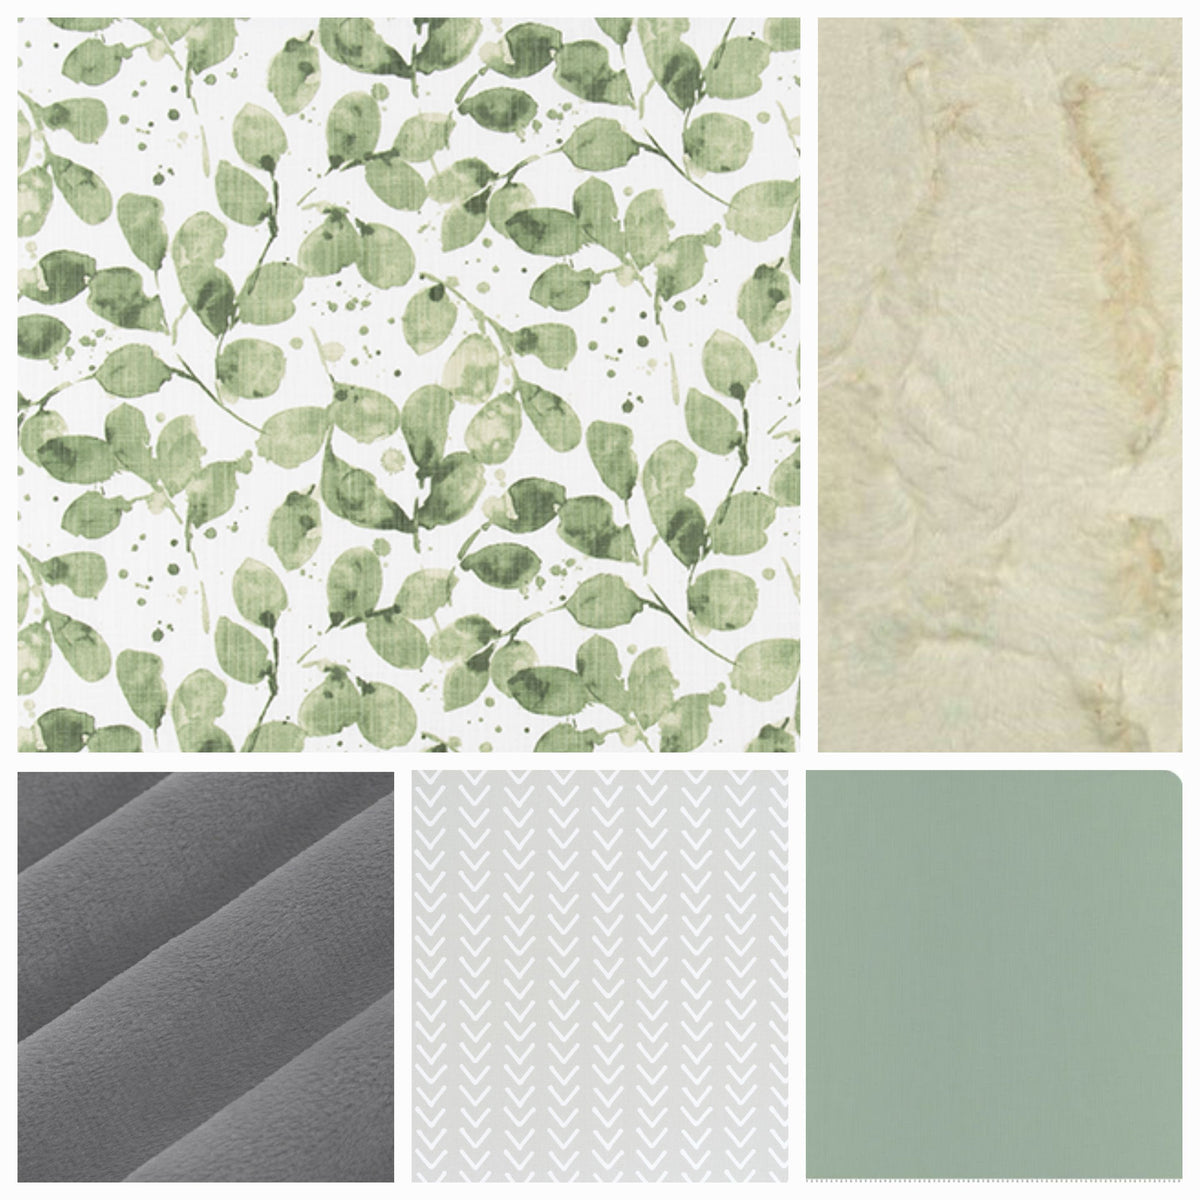 New Release Neutral Crib Bedding- Eucalyptus Leaves Baby Bedding &amp; Nursery Collection - DBC Baby Bedding Co 